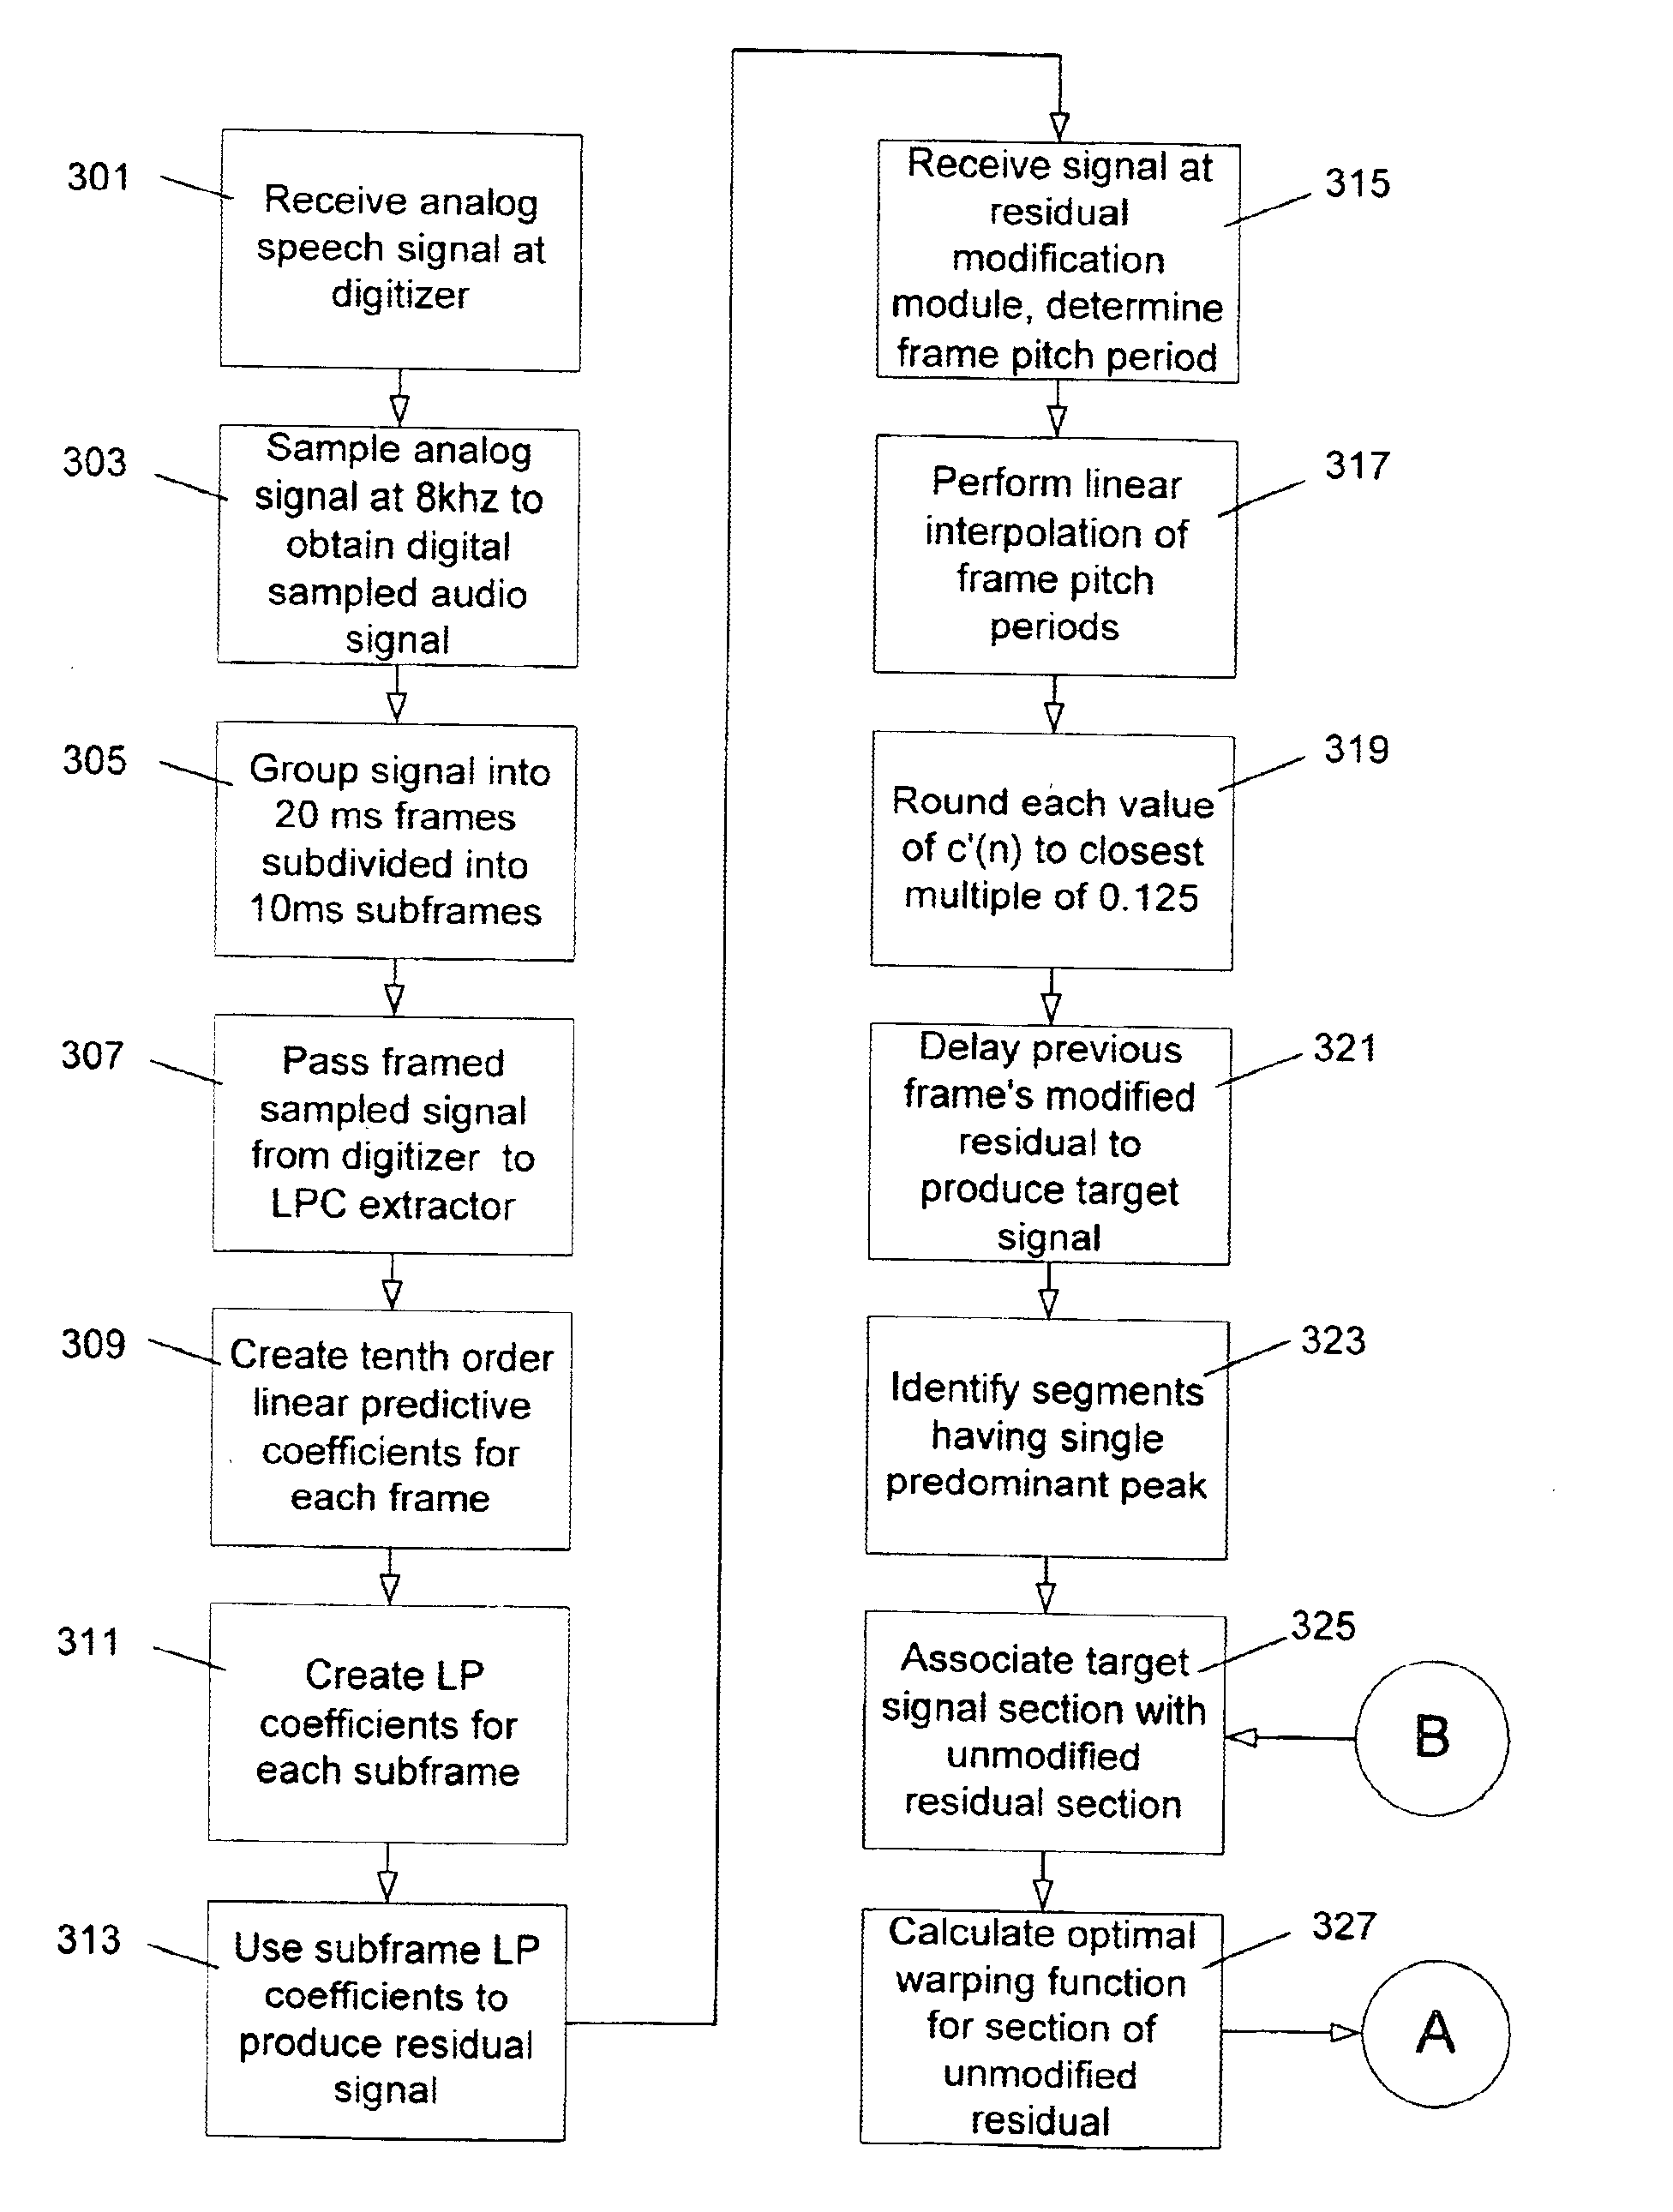 Signal modification based on continuous time warping for low bit rate CELP coding